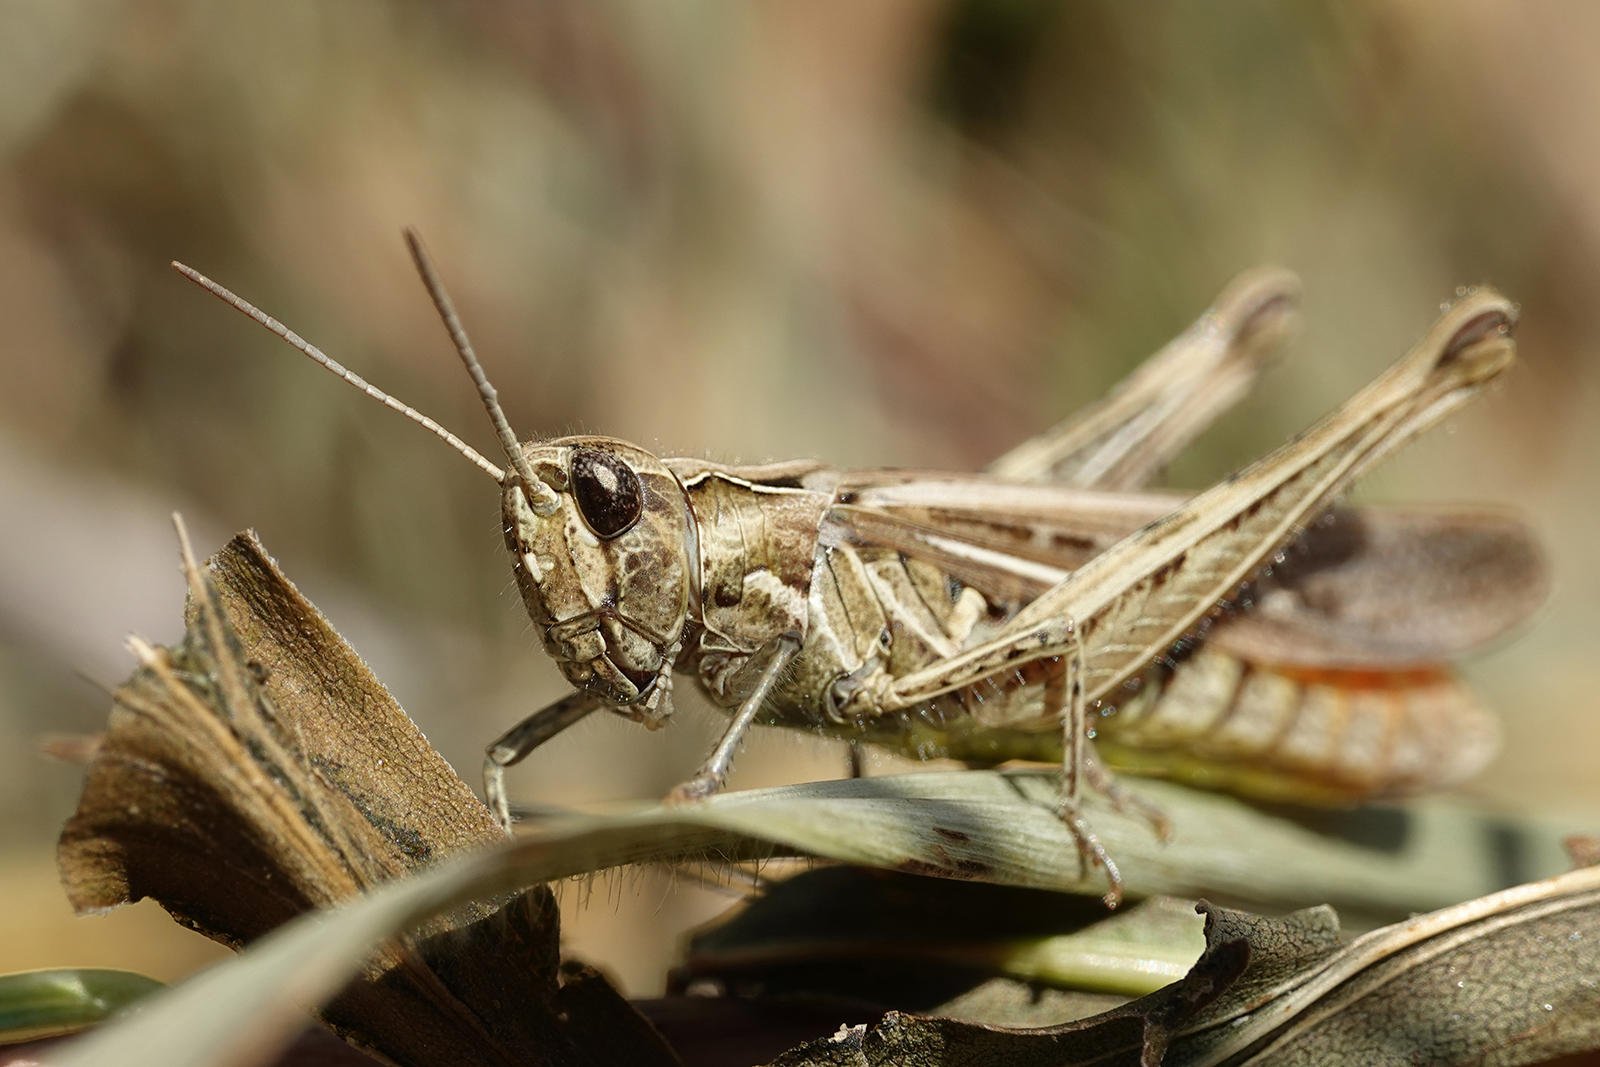 Are grasshoppers poisonous?